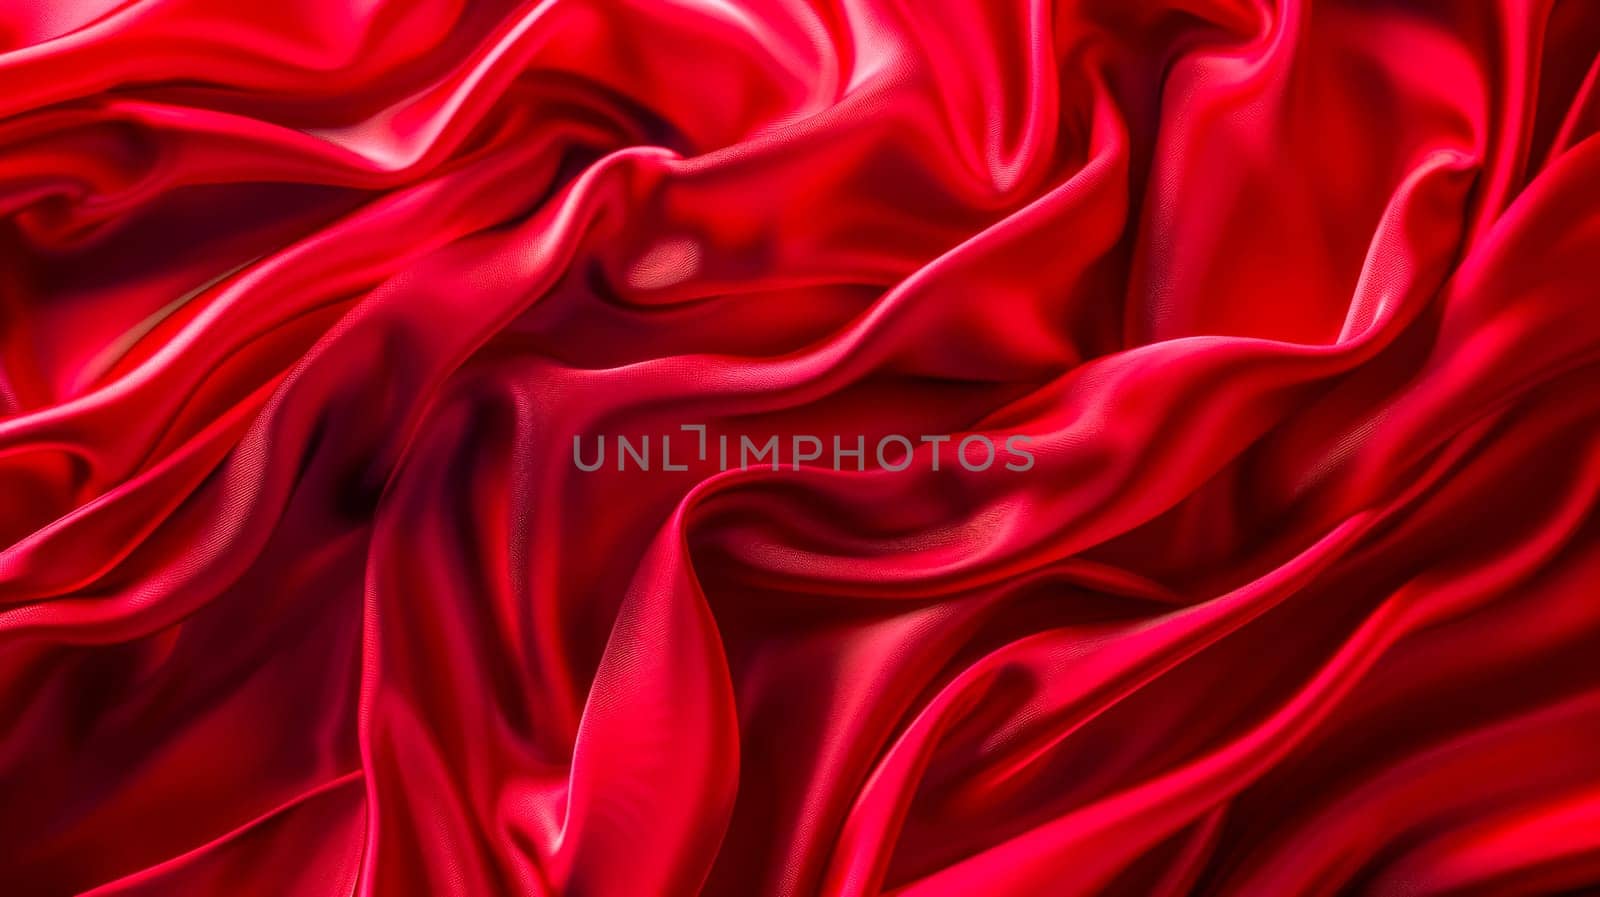 Luxurious red satin fabric texture by Edophoto